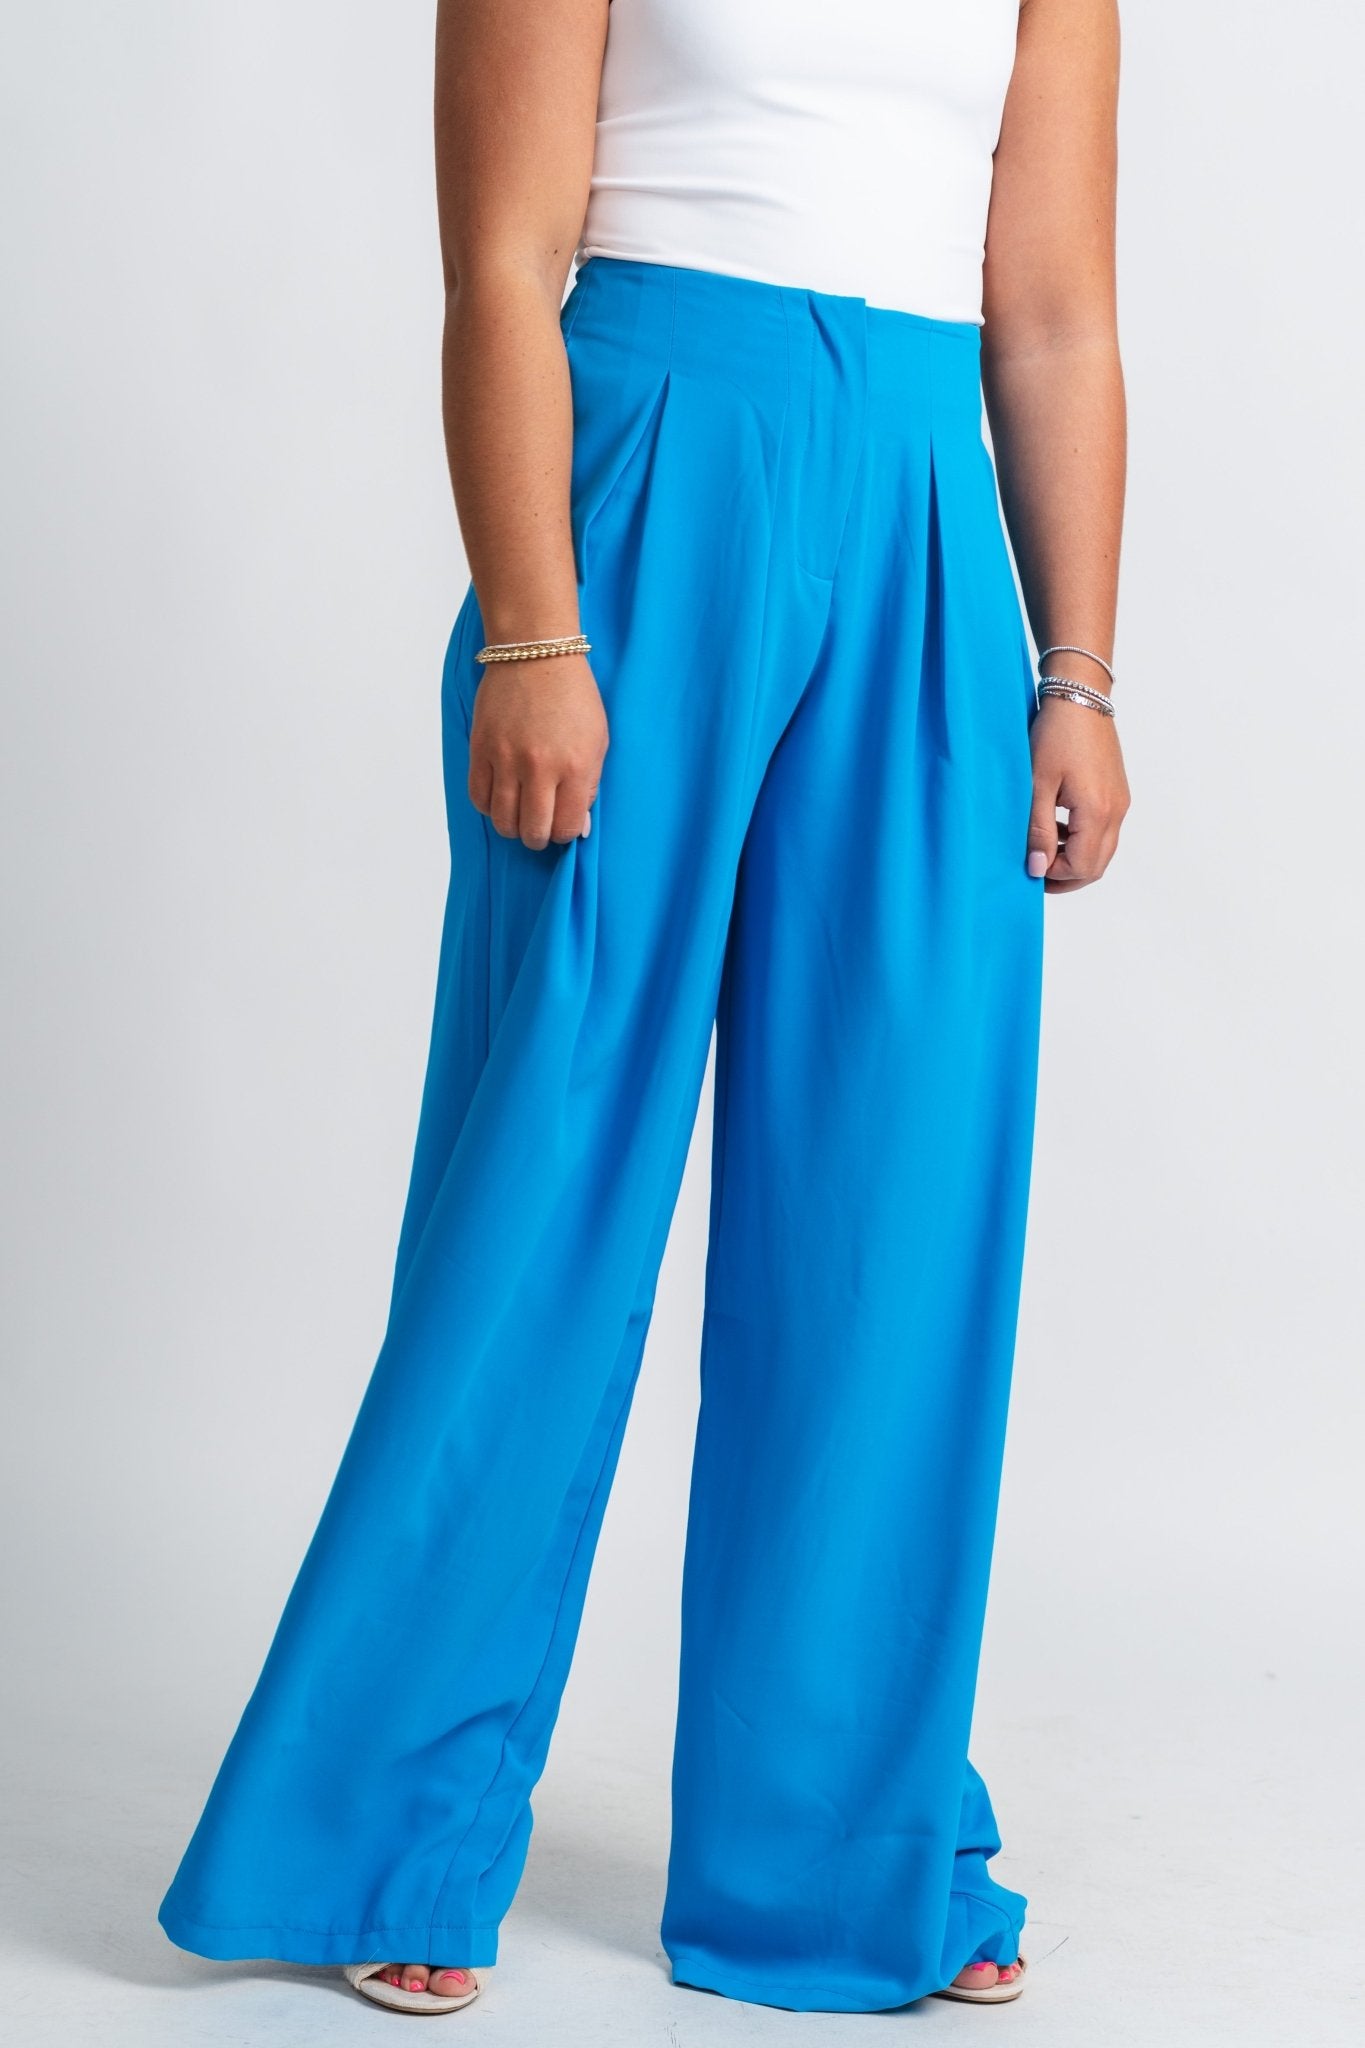 Pleated wide leg pants ocean blue - Fun Pants - Unique Getaway Gear at Lush Fashion Lounge Boutique in Oklahoma